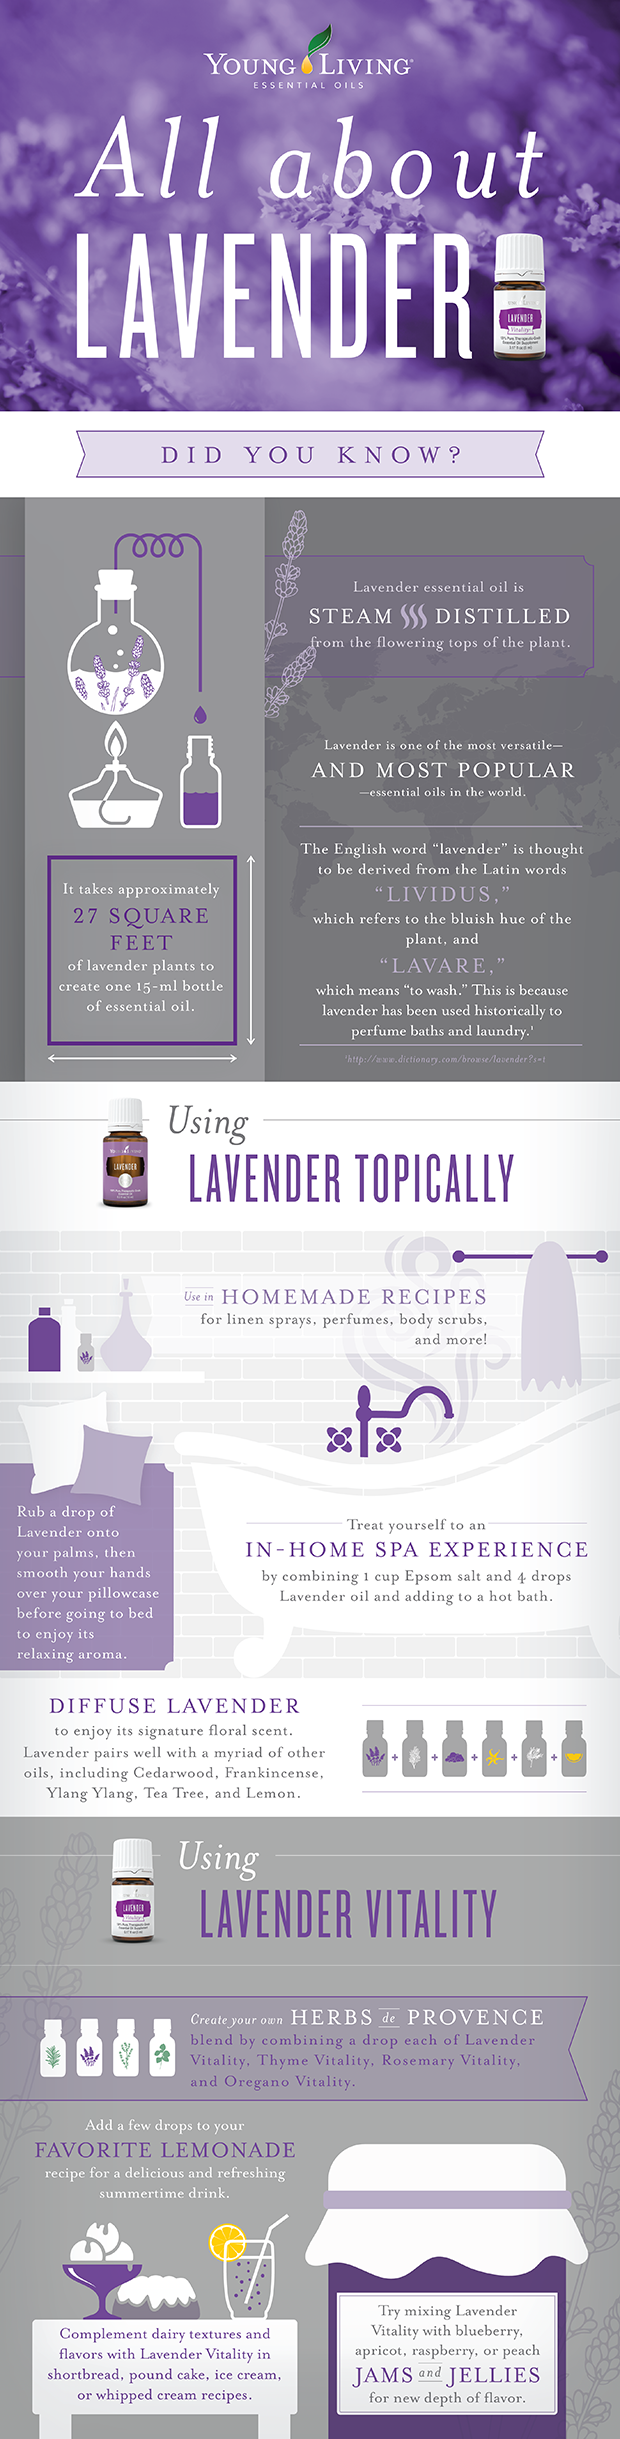 how to use lavender essential oil how to use lavender essential oil